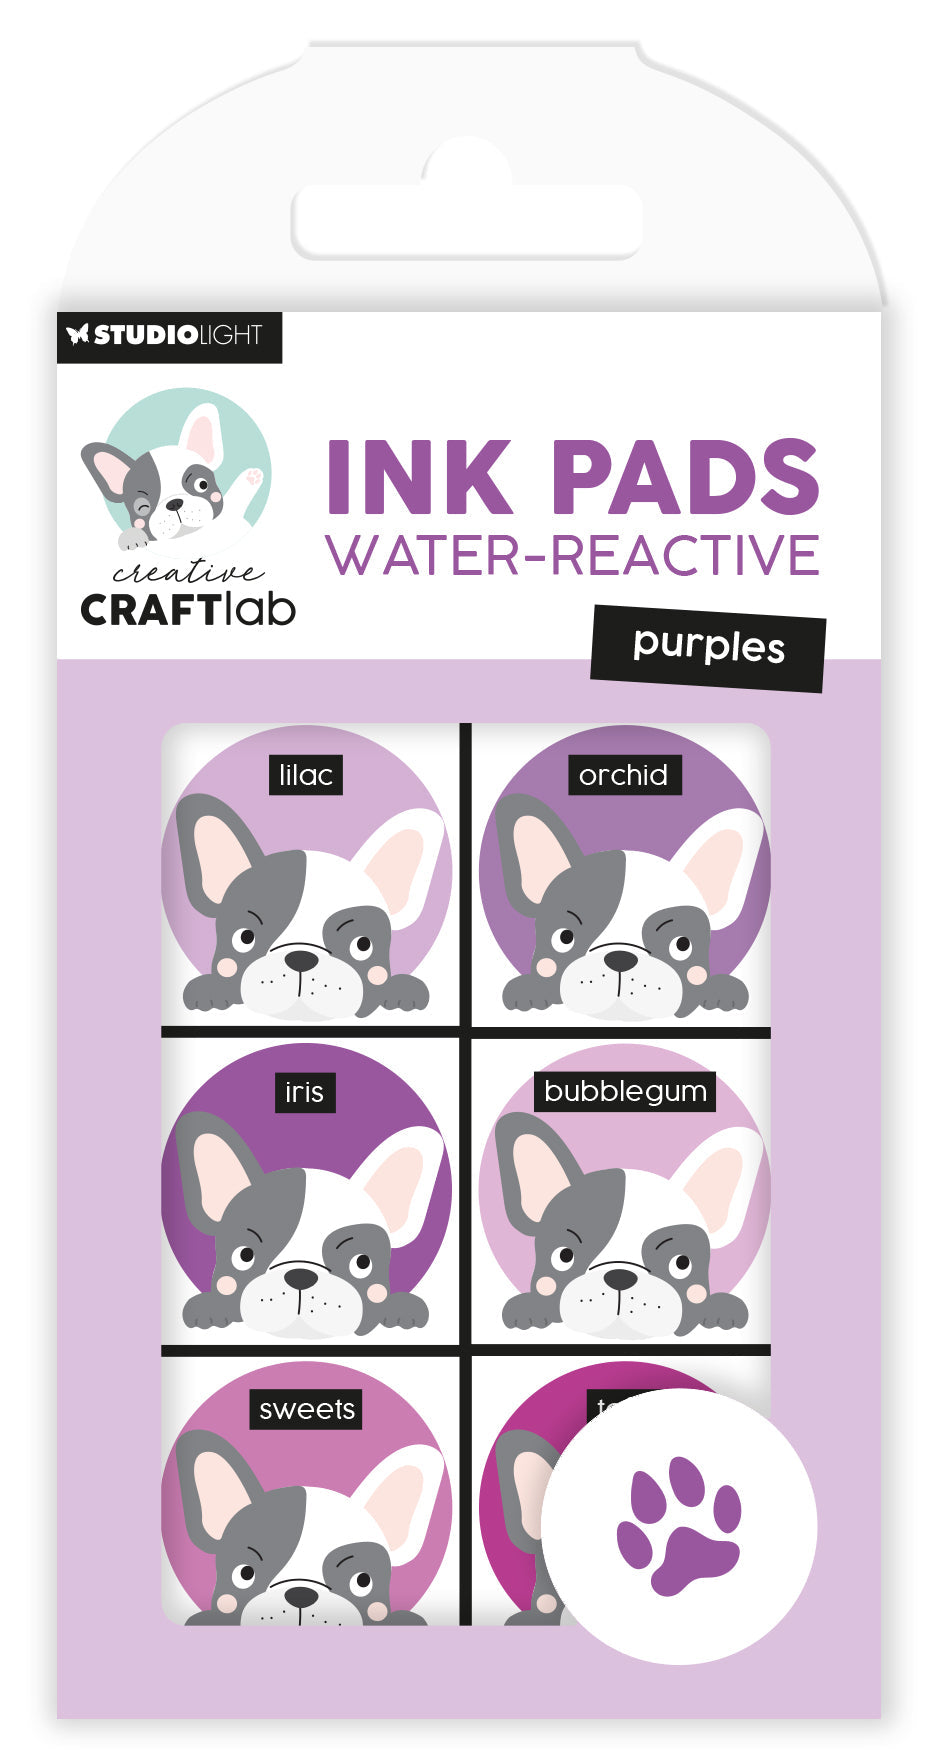 CCL Ink Pads Water-Reactive Purples Essentials 120x70x16mm 6 PC nr.20